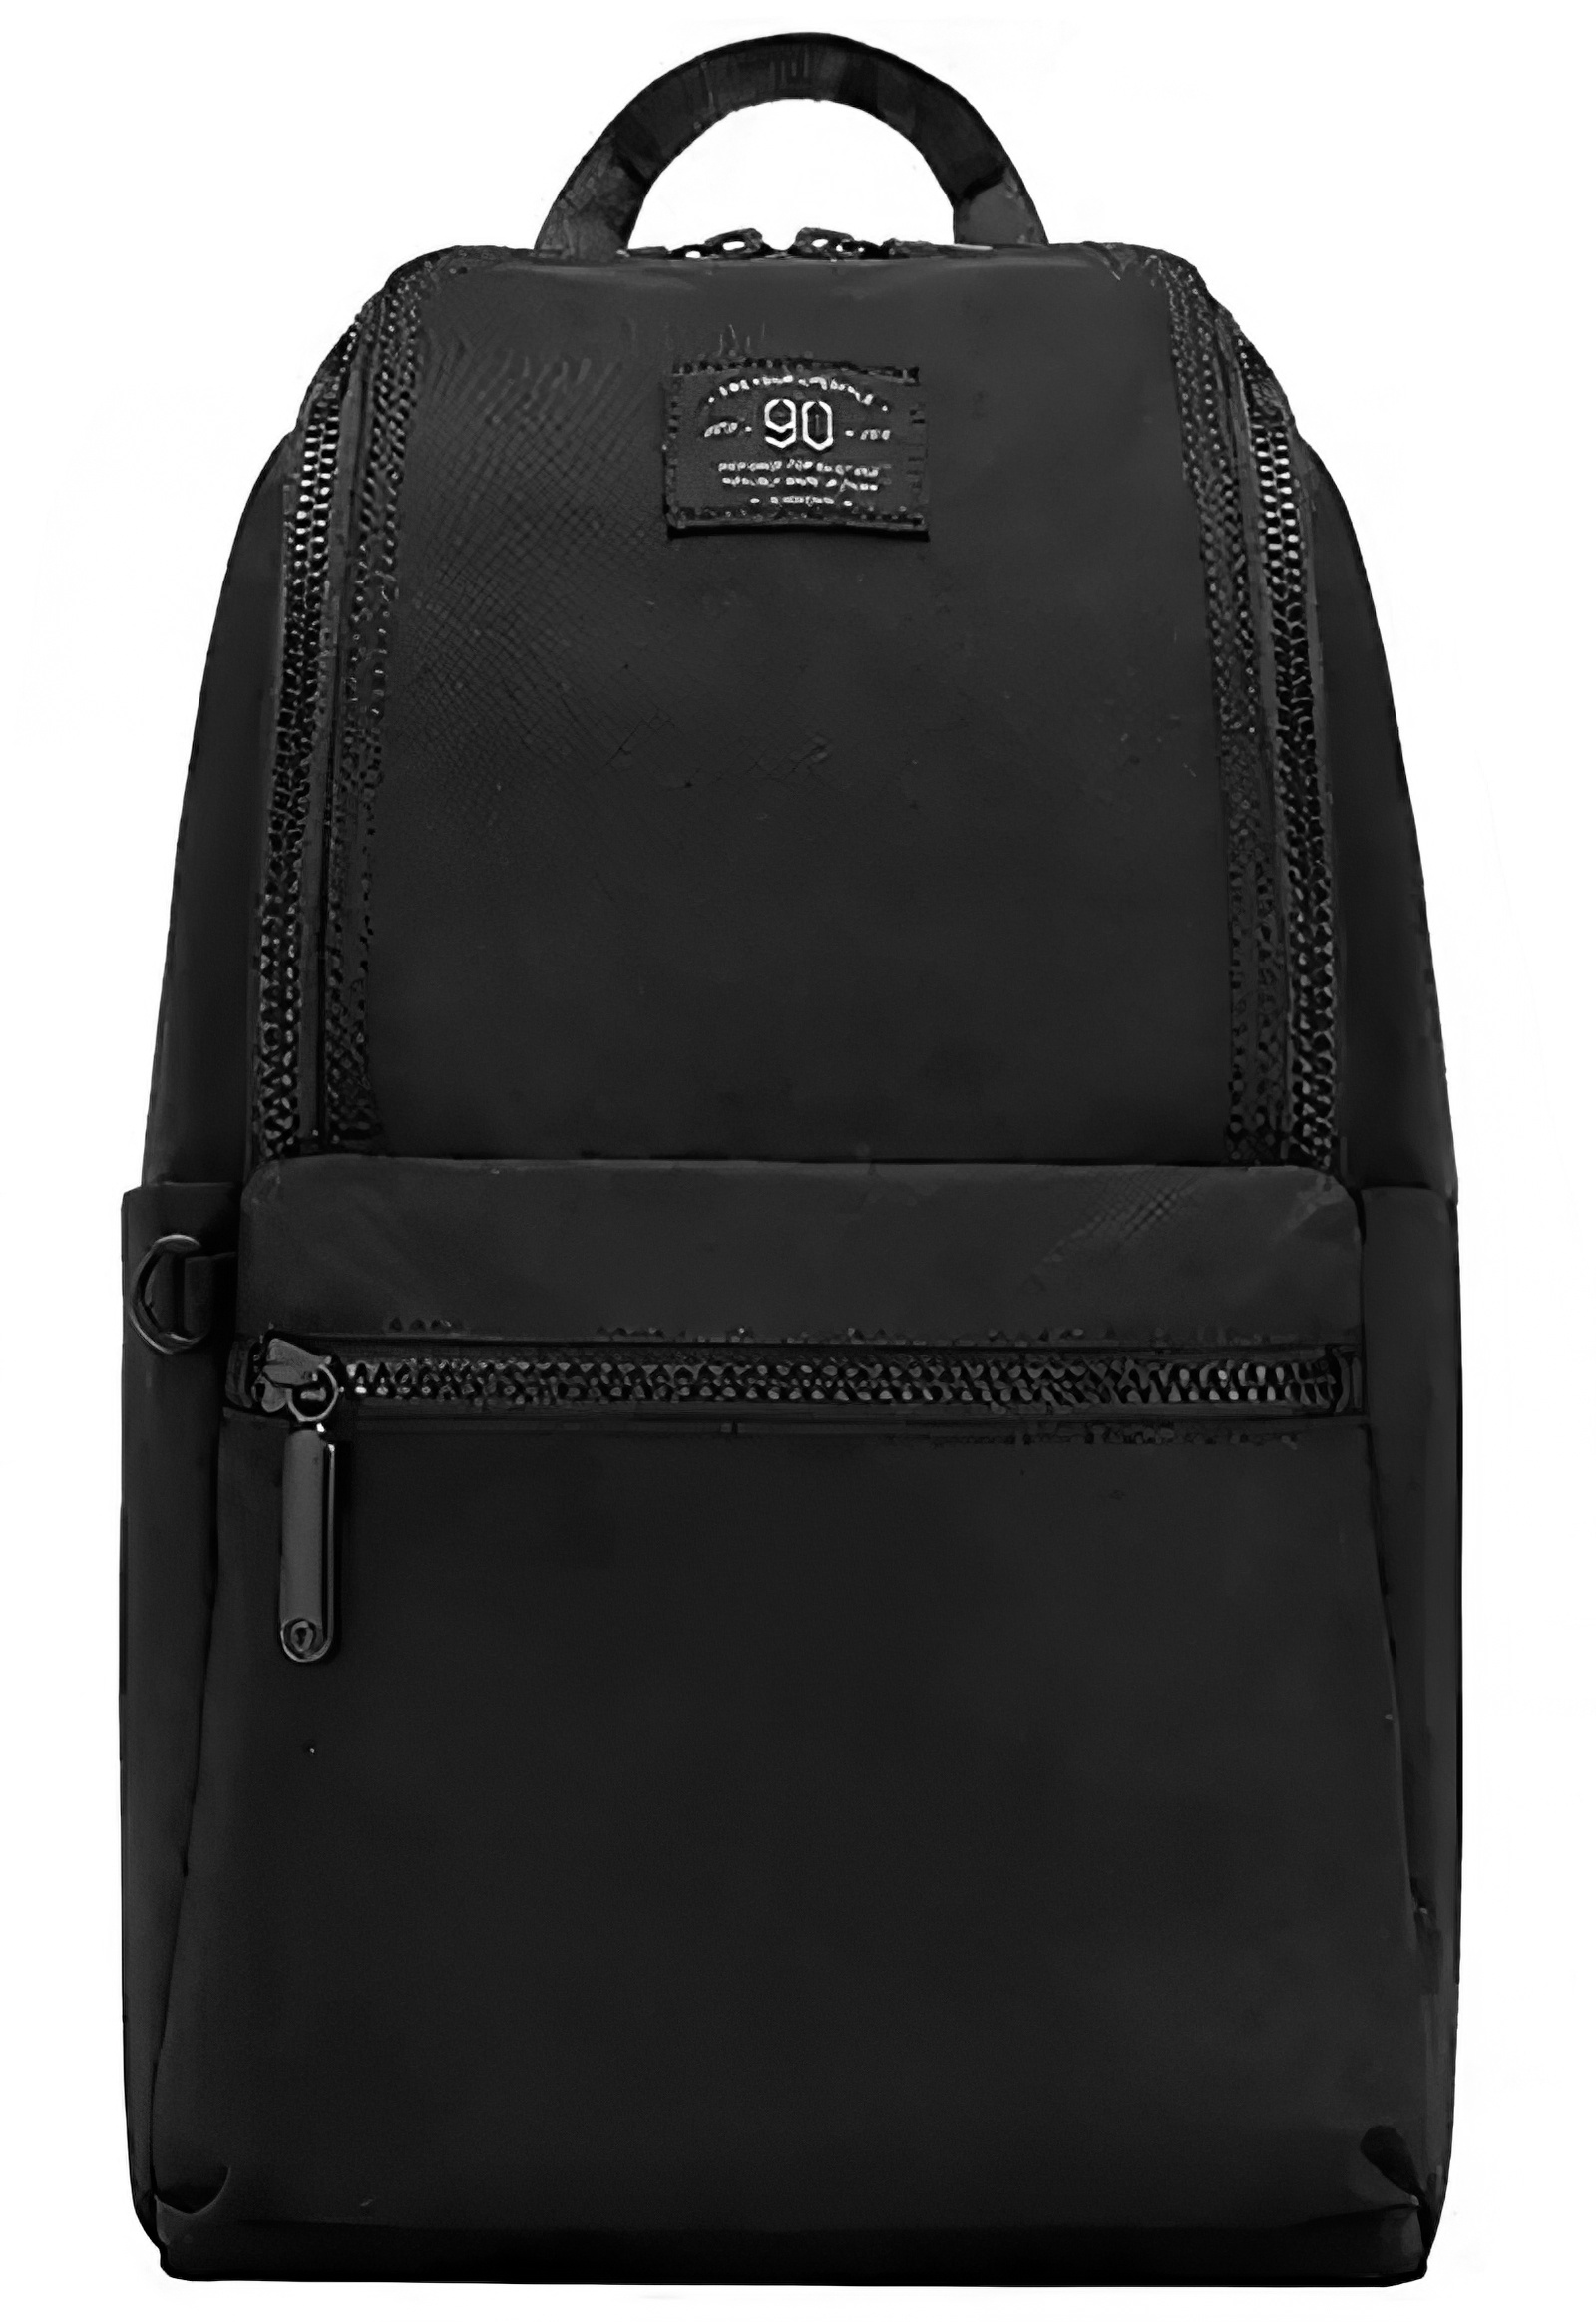 Xiaomi 90 Points Pro Leisure Travel Backpack 10L Black КАРКАМ